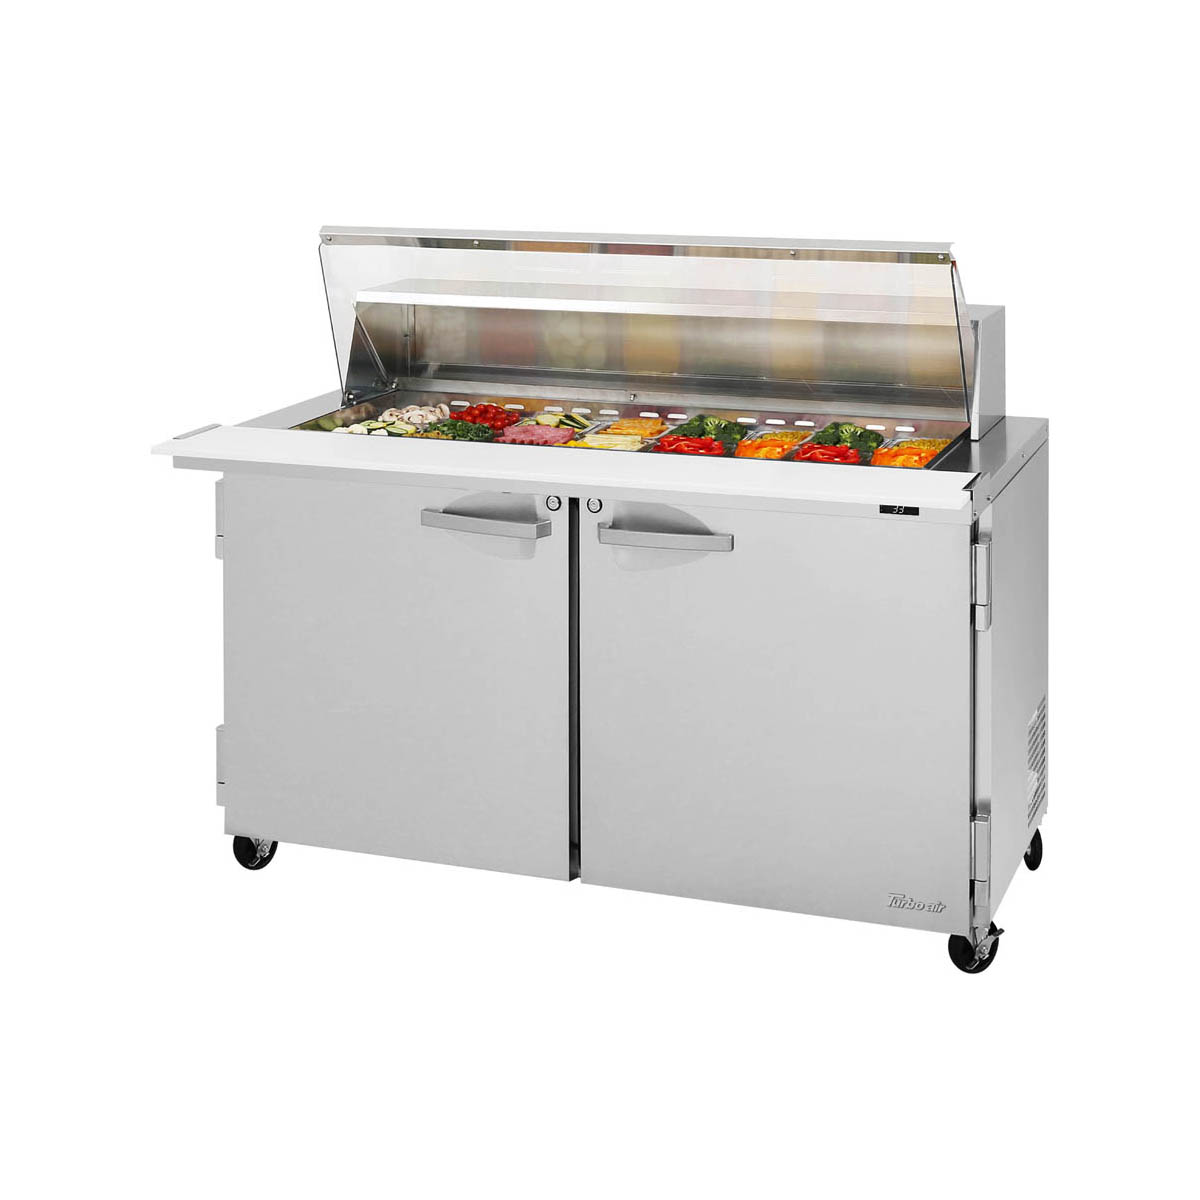 Turbo Air PST-60-24-N-CL 60″ Two Section Mega Top Sandwich Prep Table, 24 Pan